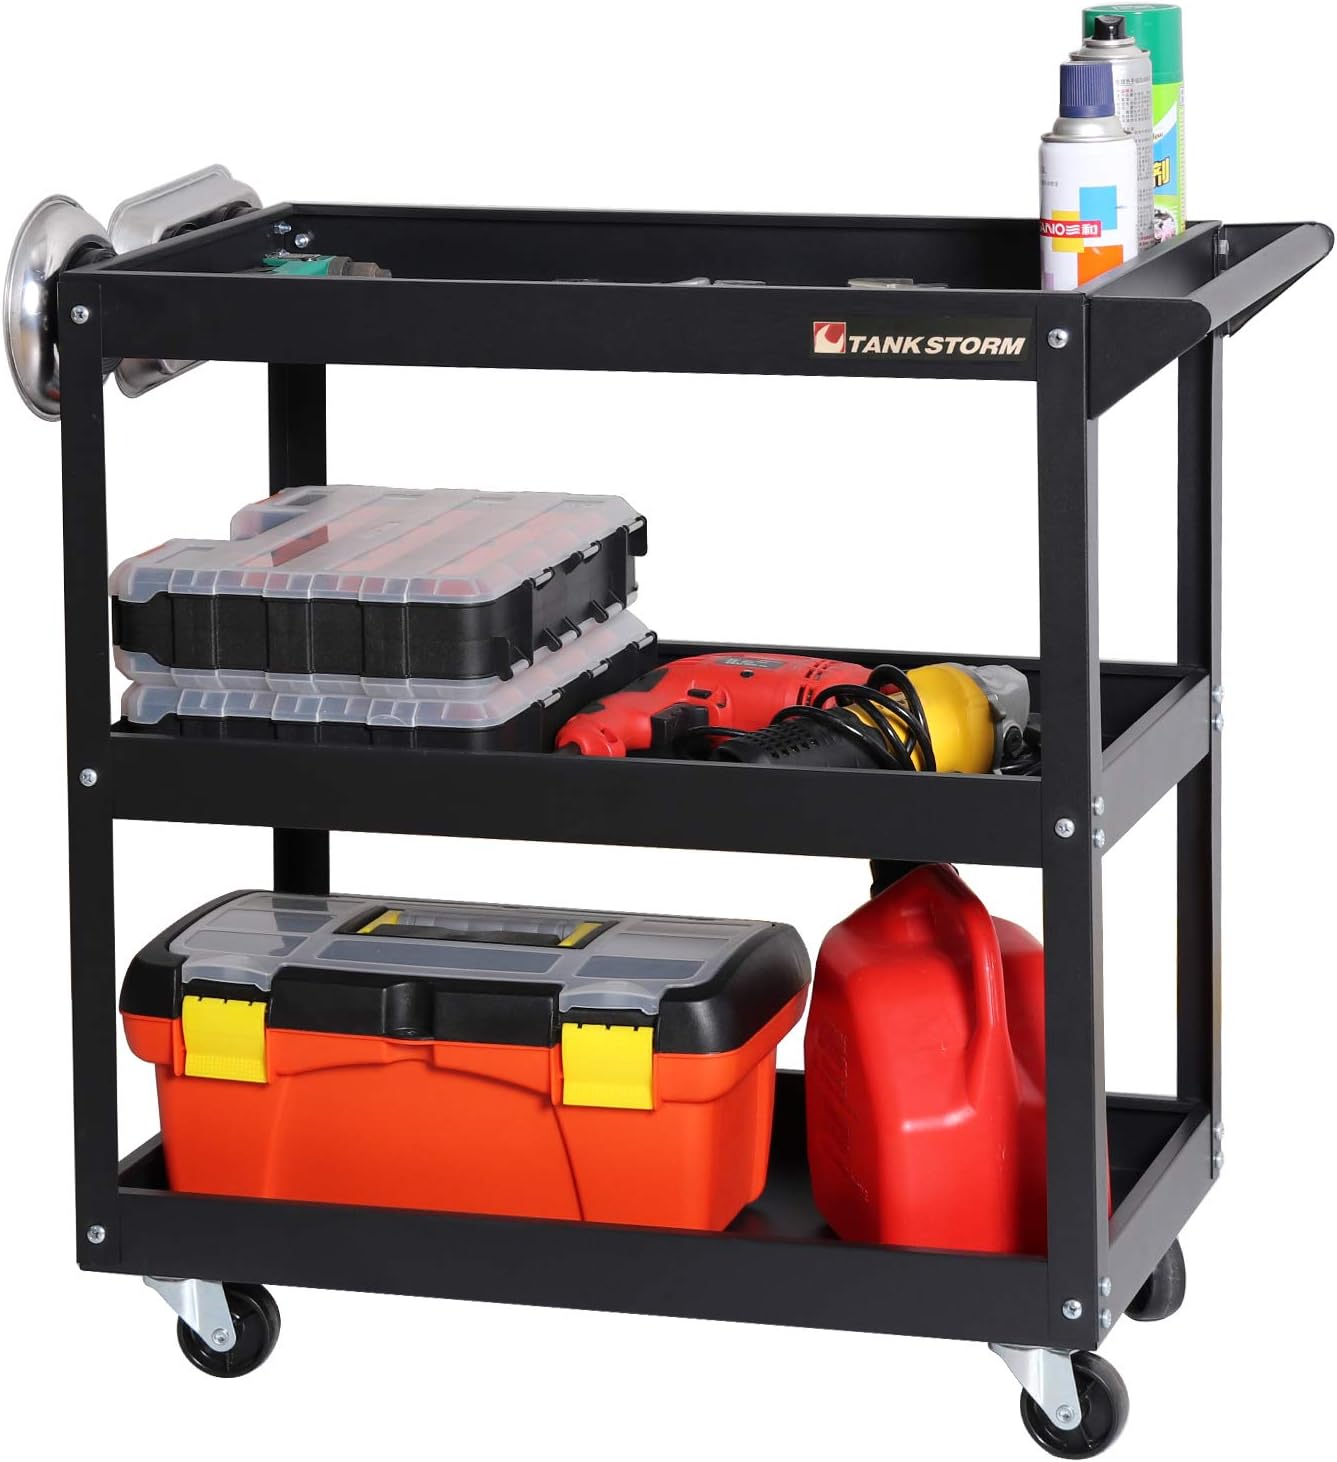 TANKSTORM Service Tool Cart 3-Tire Rolling, Industrial Commercial Service Cart-180 Lbs Capacity, No Drawer Included(TQ112)